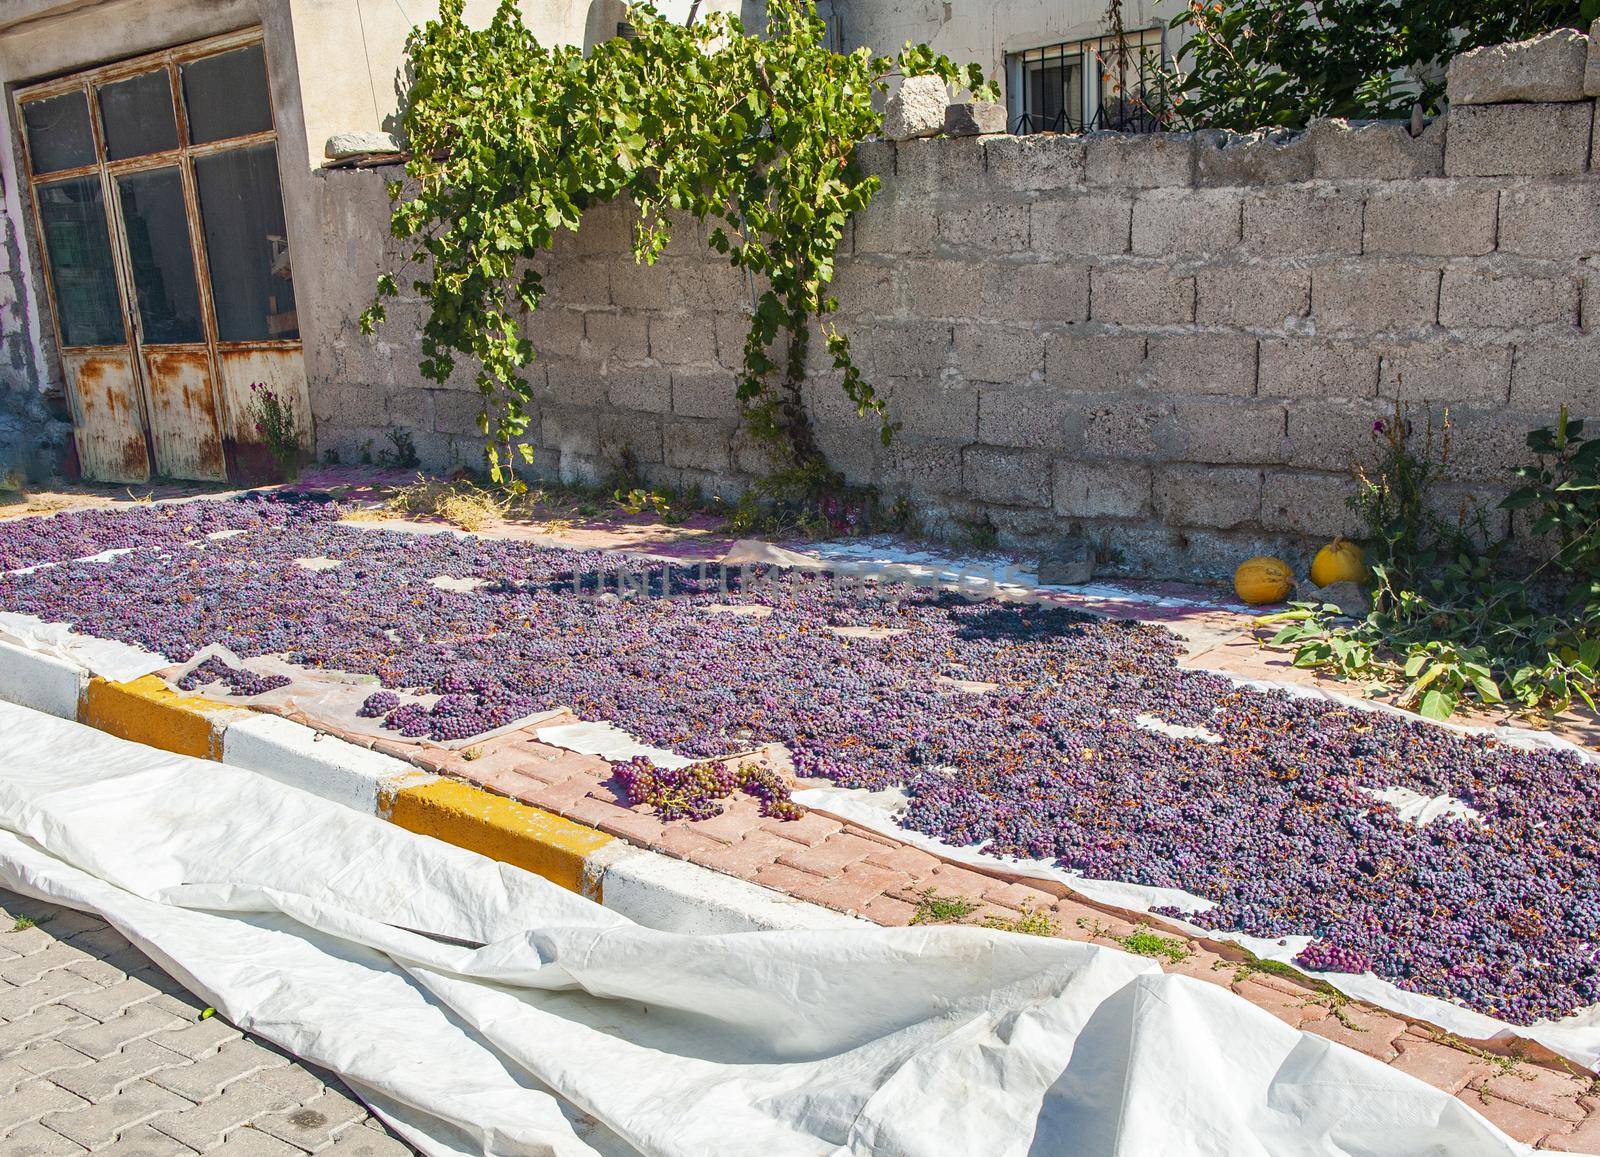 Drying wine grapes turning them to raisins in Turkey by fyletto